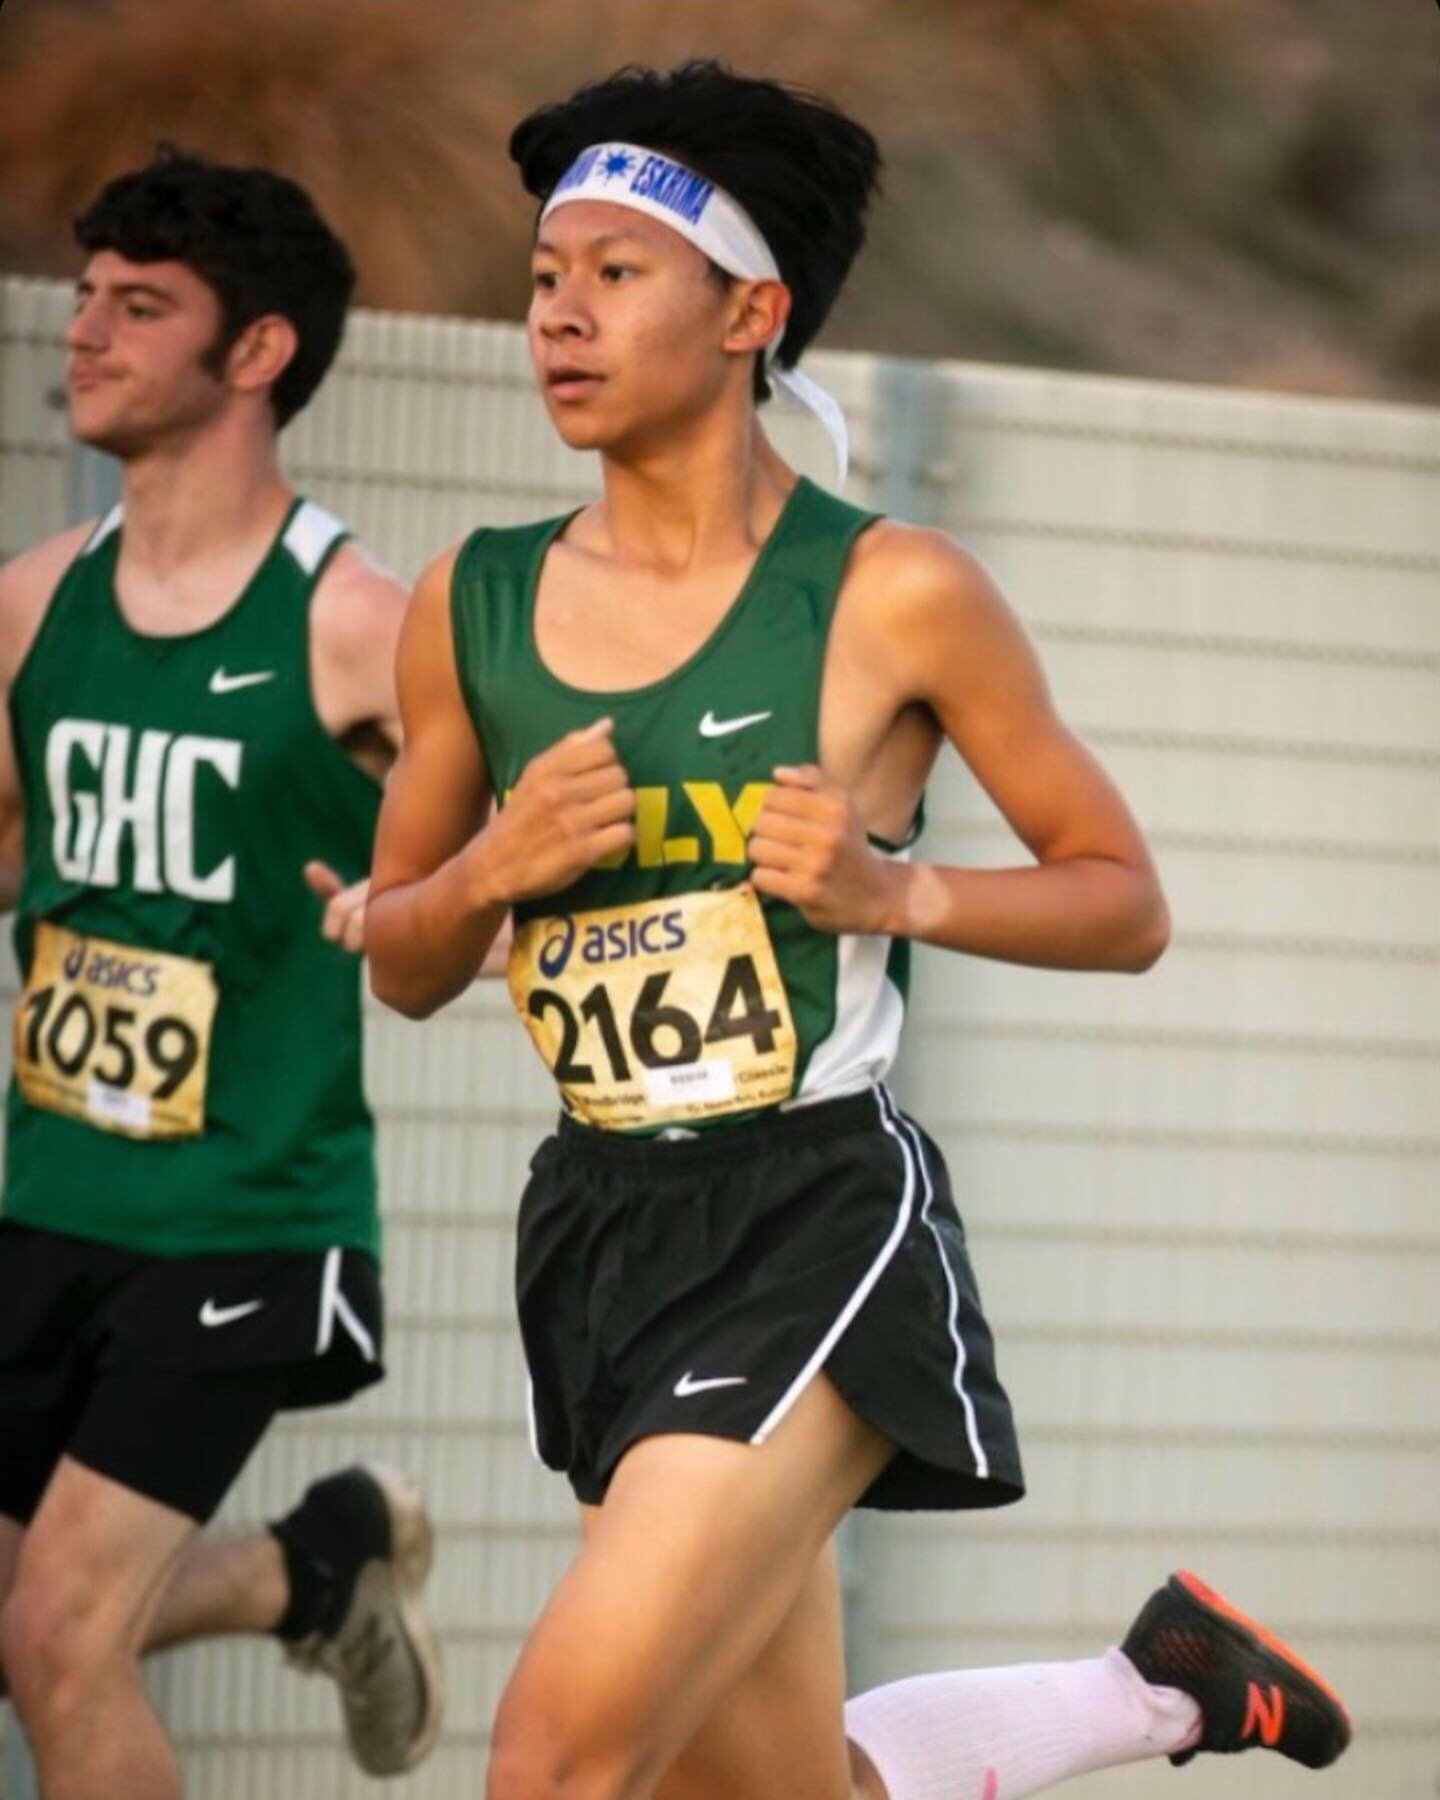 Vincent Santos runs cross country and track. He also plays trumpet and piano in the Poly Jazz A band and Marching Band and is &ldquo;sill on his 4.0 streak.&rdquo; He is also able to be active in clubs and fill leadership roles. 

His favorite races 